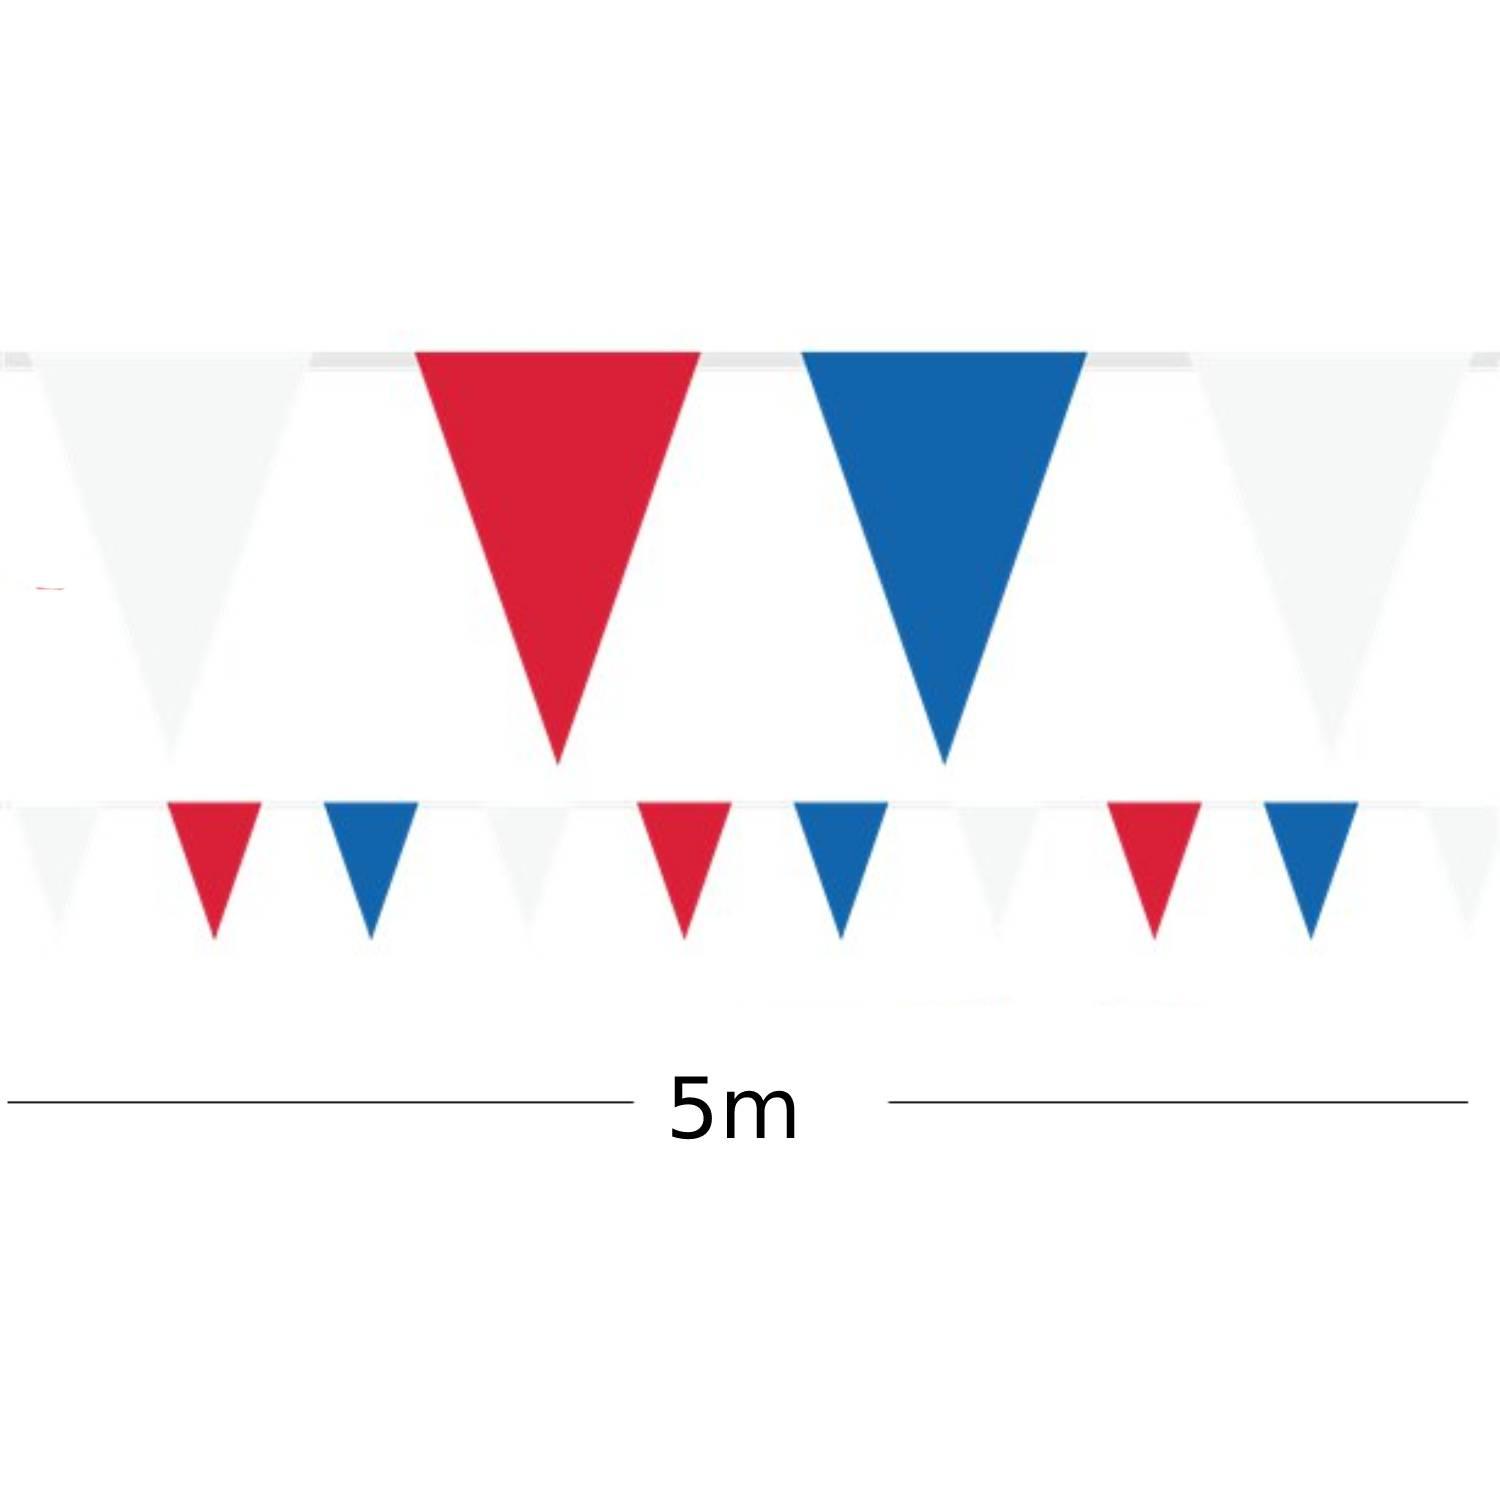 Patriotic 5m length Red, White and Blue Pennant Flag Bunting with 20 Pennants by Amscan 9913044 available here at Karnival Costumes online party shop